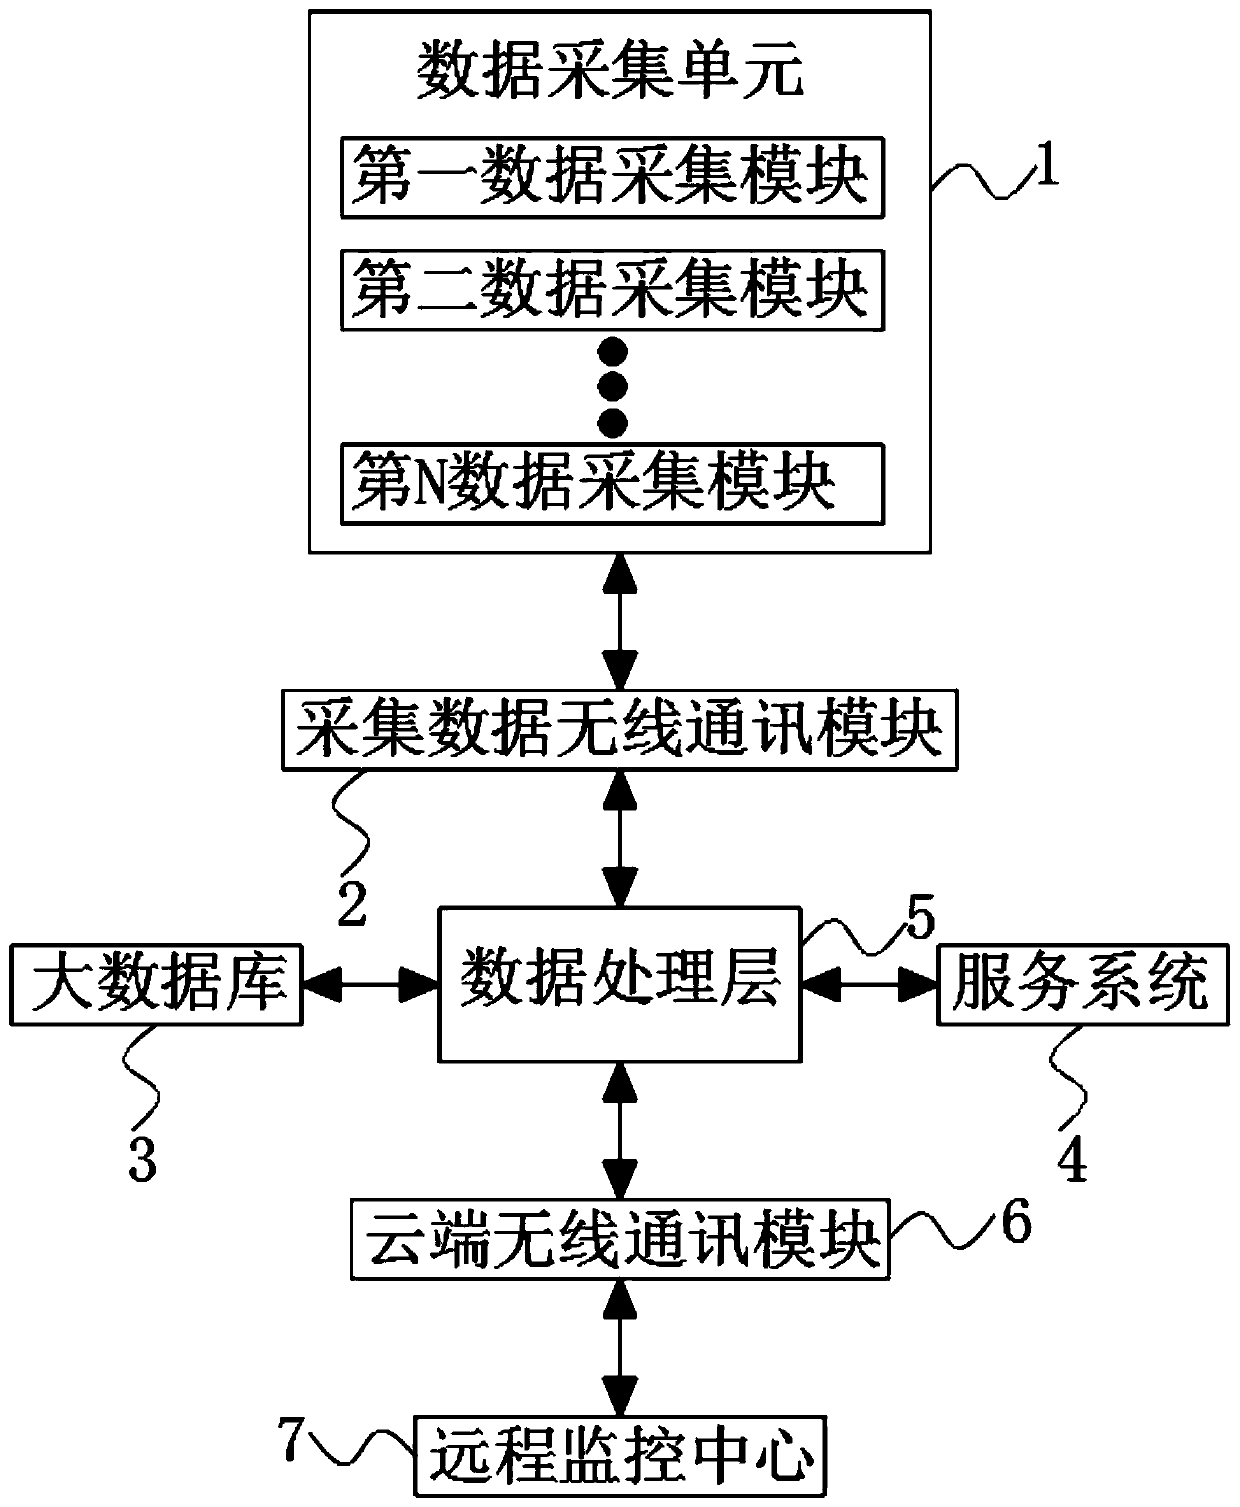 Charging remote management and control platform of electric vehicle